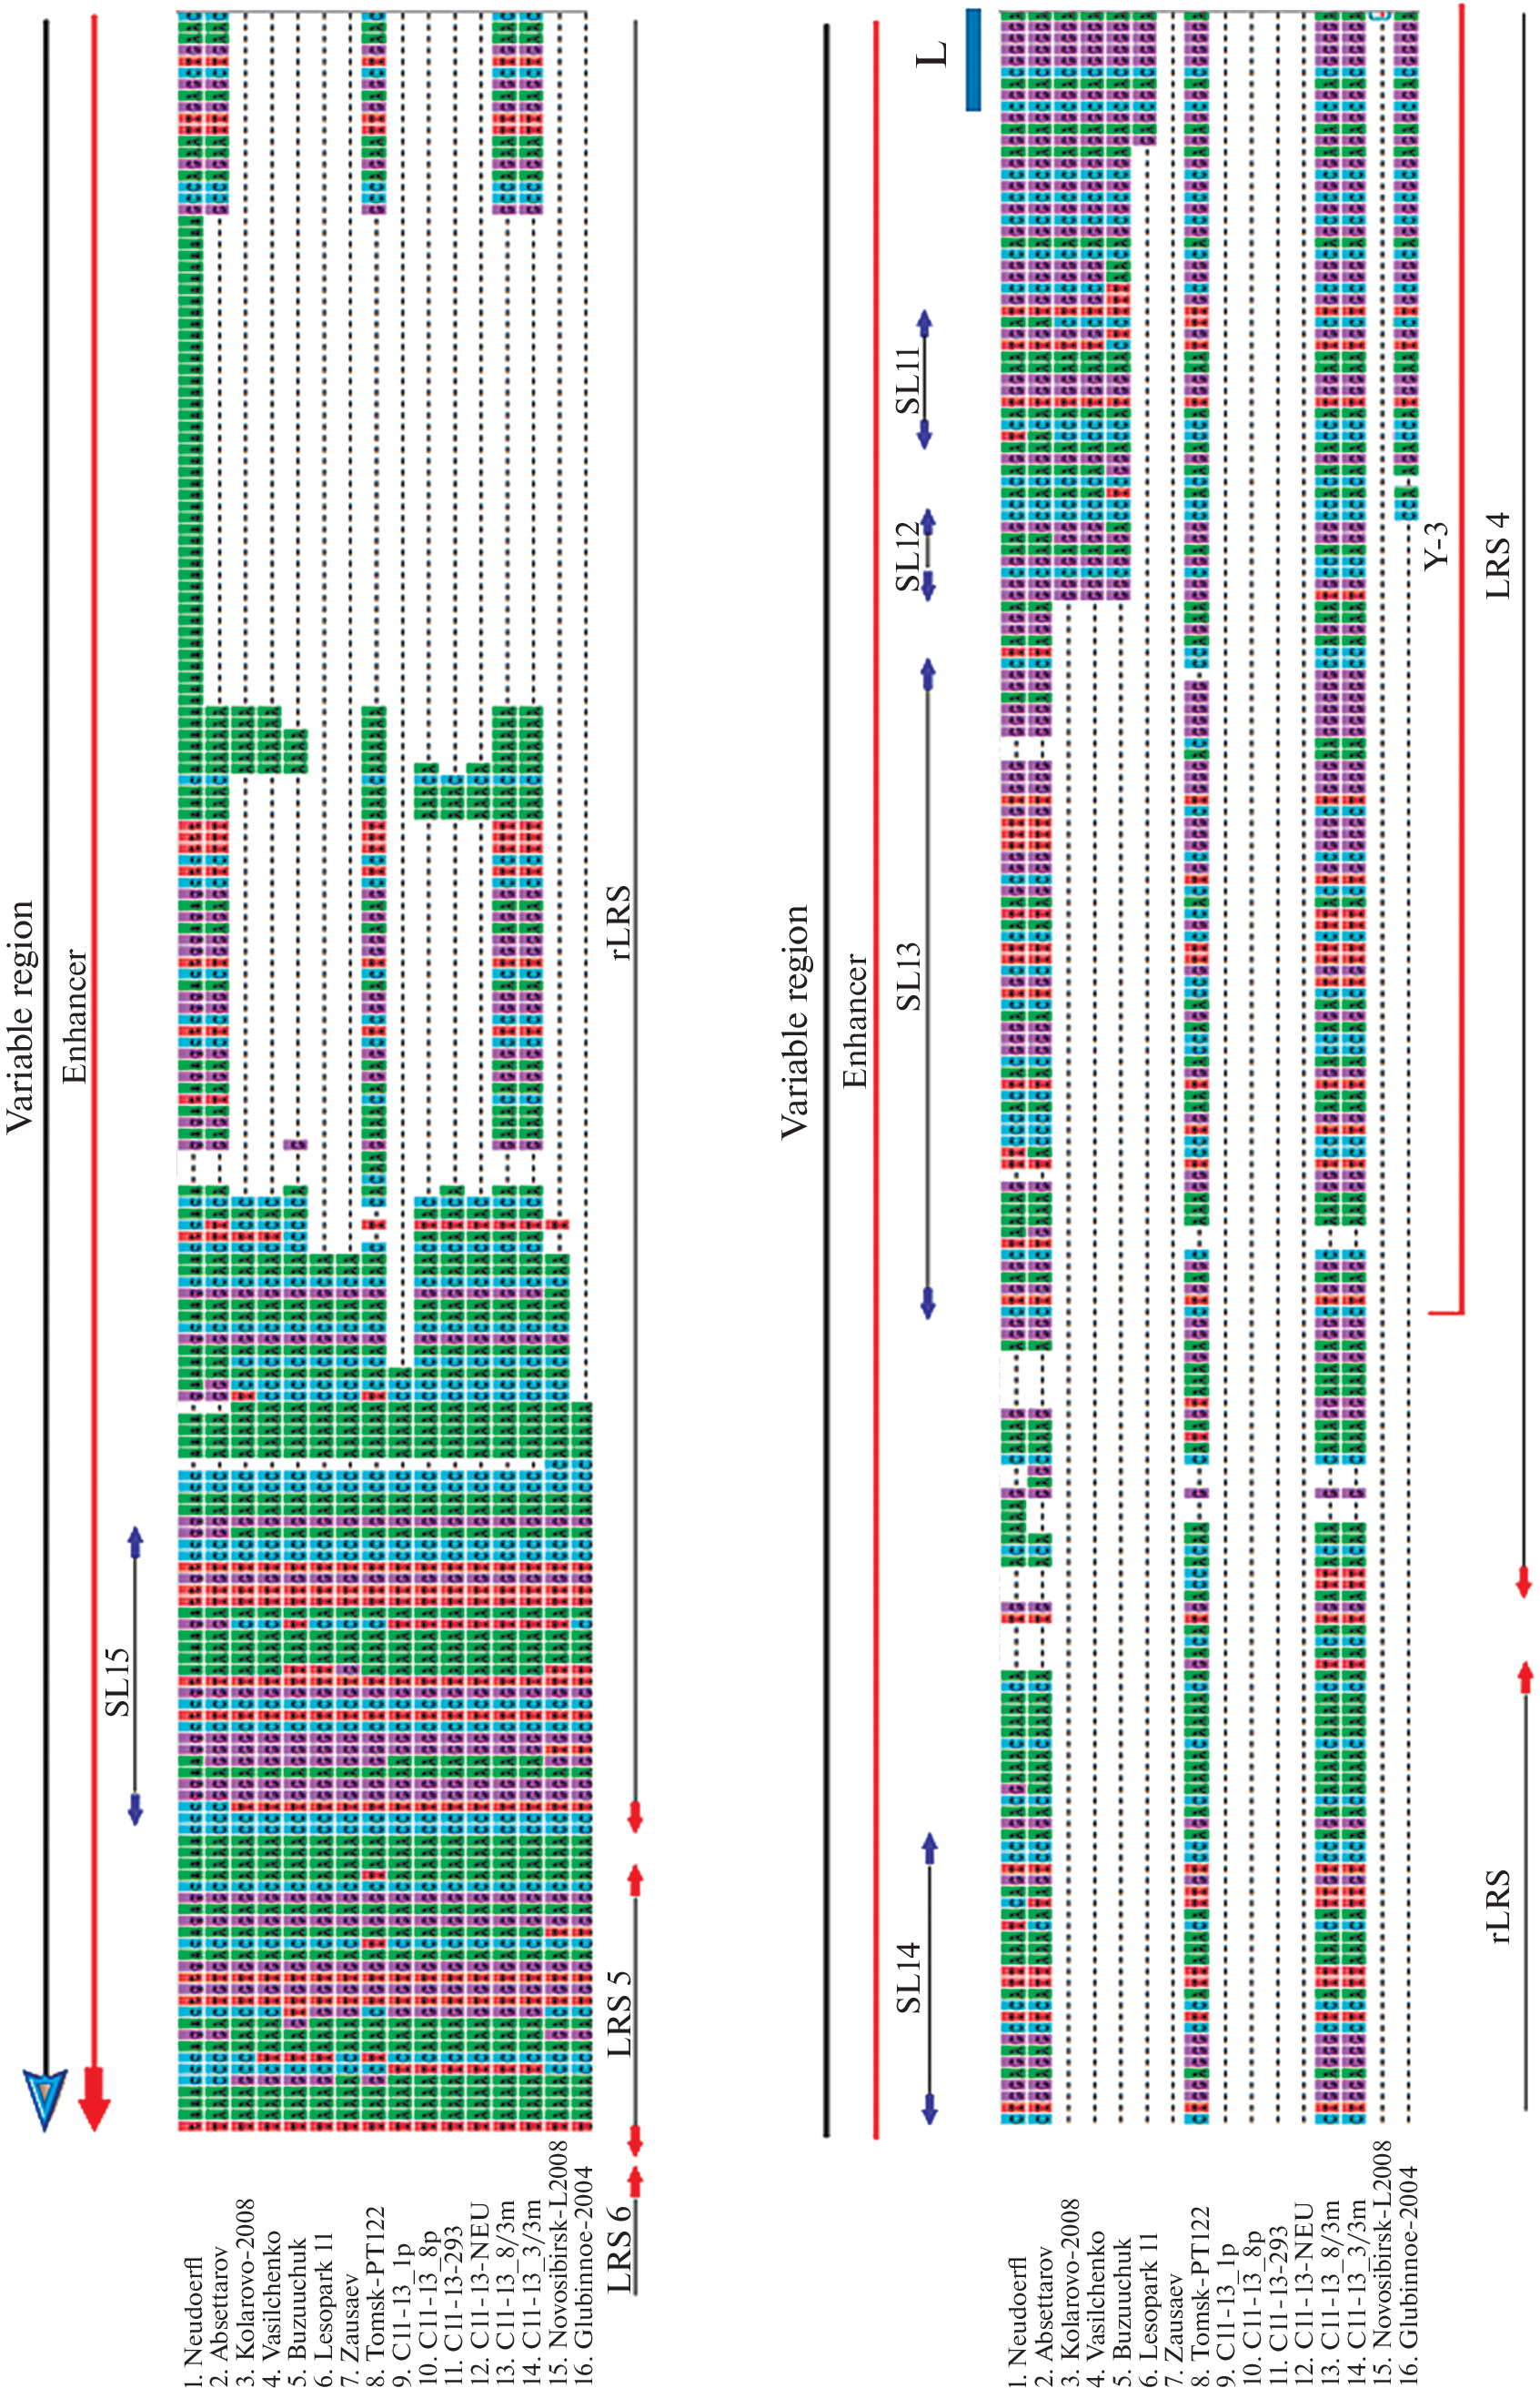 Changes in the Genome of the Tick-Borne Encephalitis Virus during Cultivation